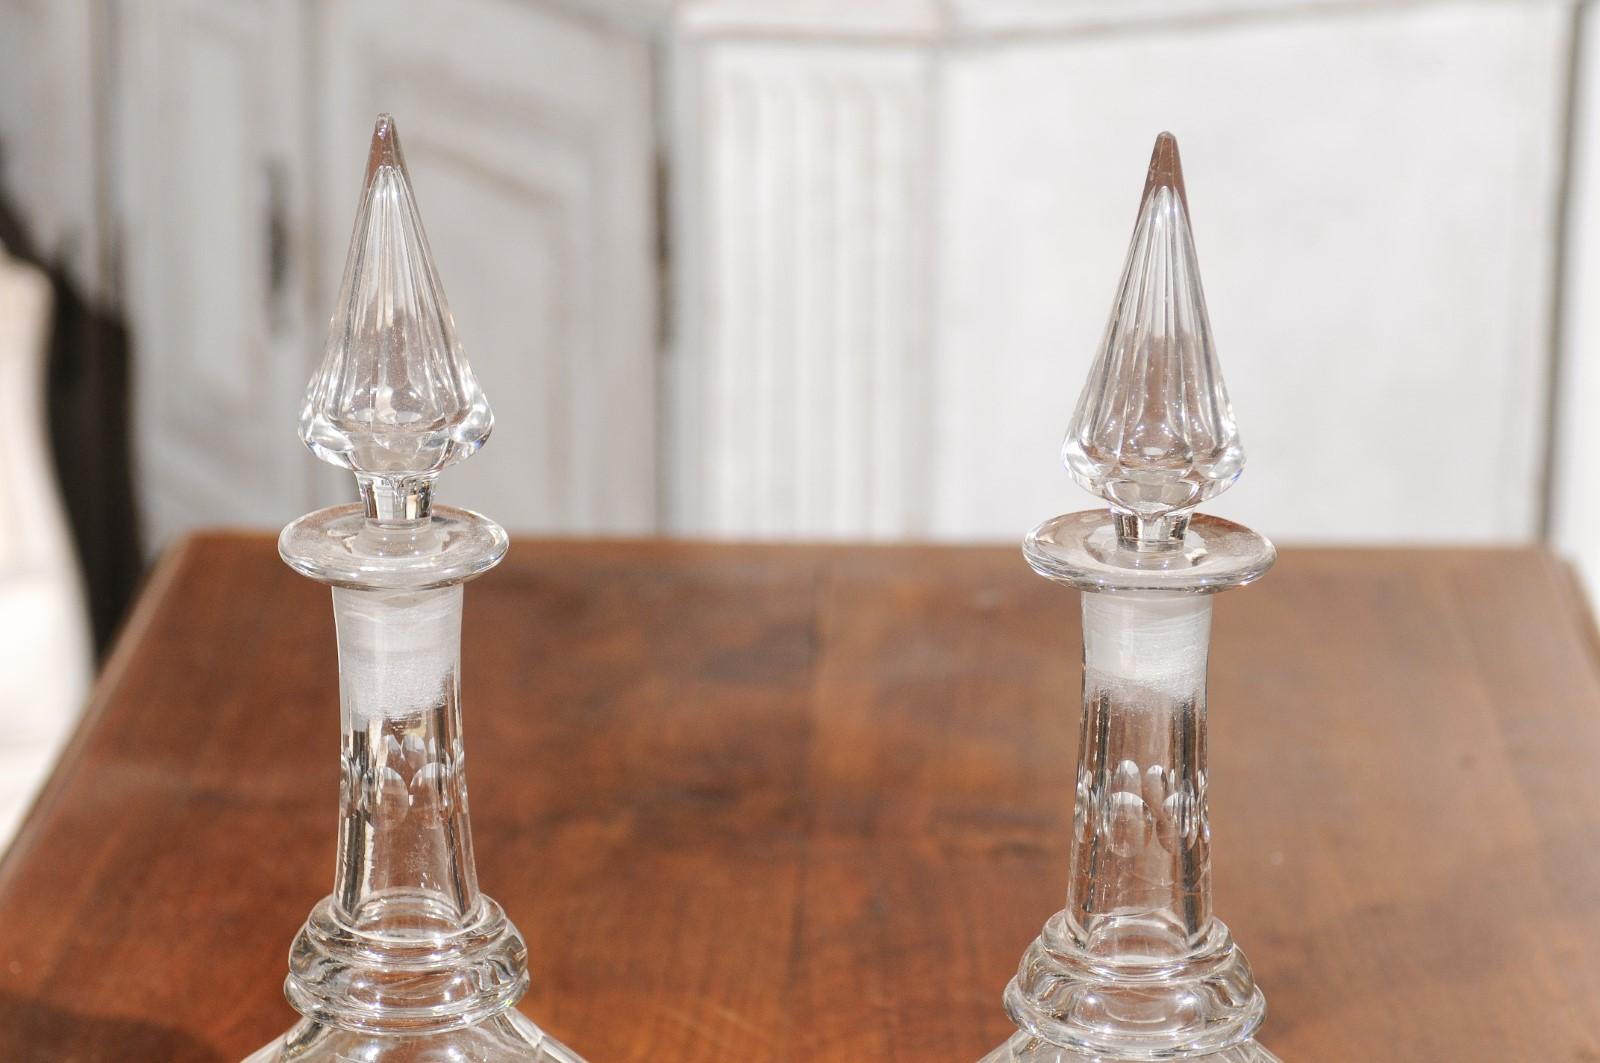 19th Century Pair of English Late Victorian Cut Crystal Decanters with Stoppers, circa 1860